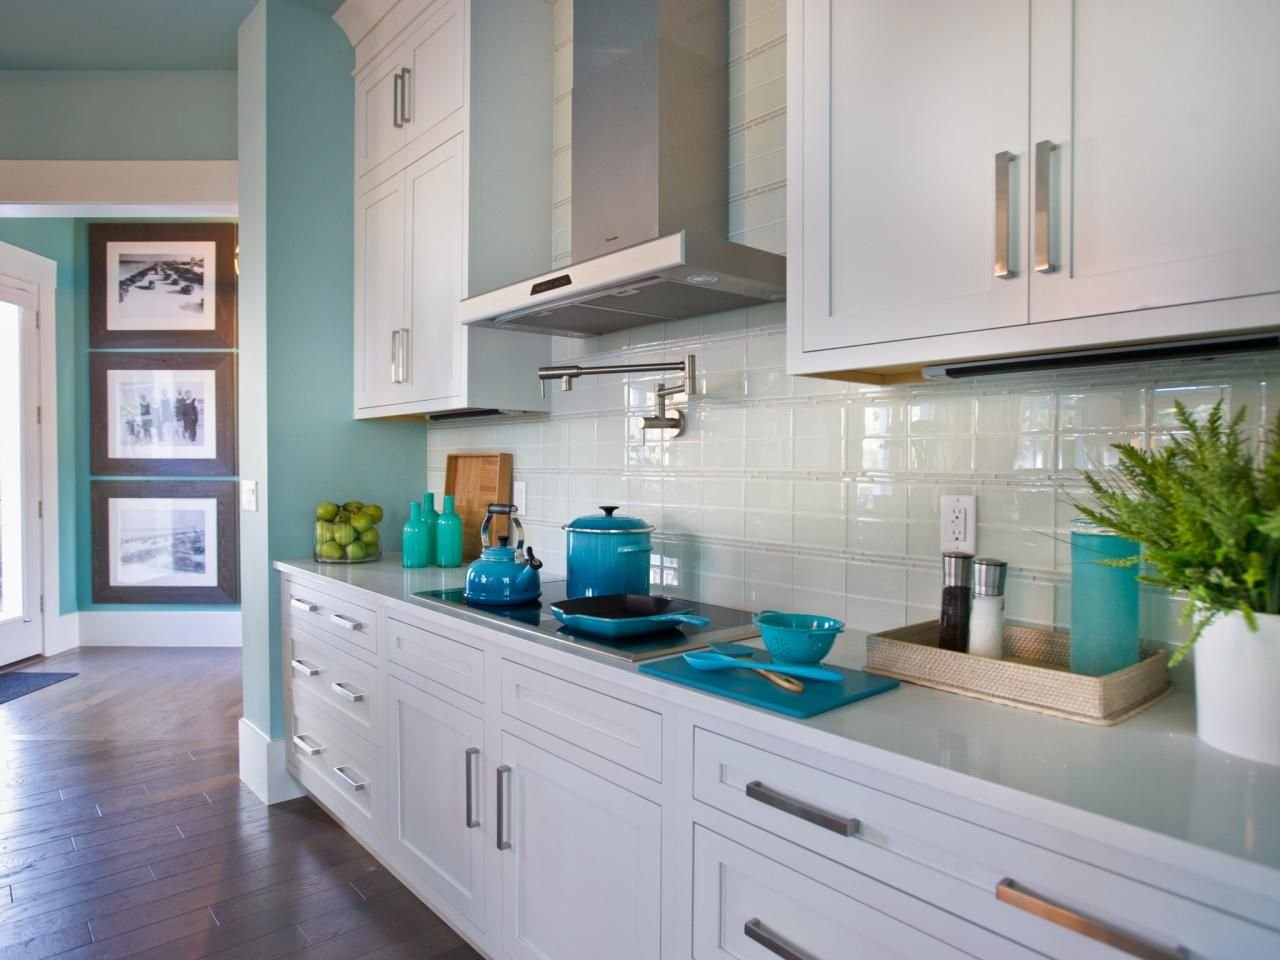 Versatile Elegance: How Subway Tiles Add Style to Any Kitchen Aesthetic